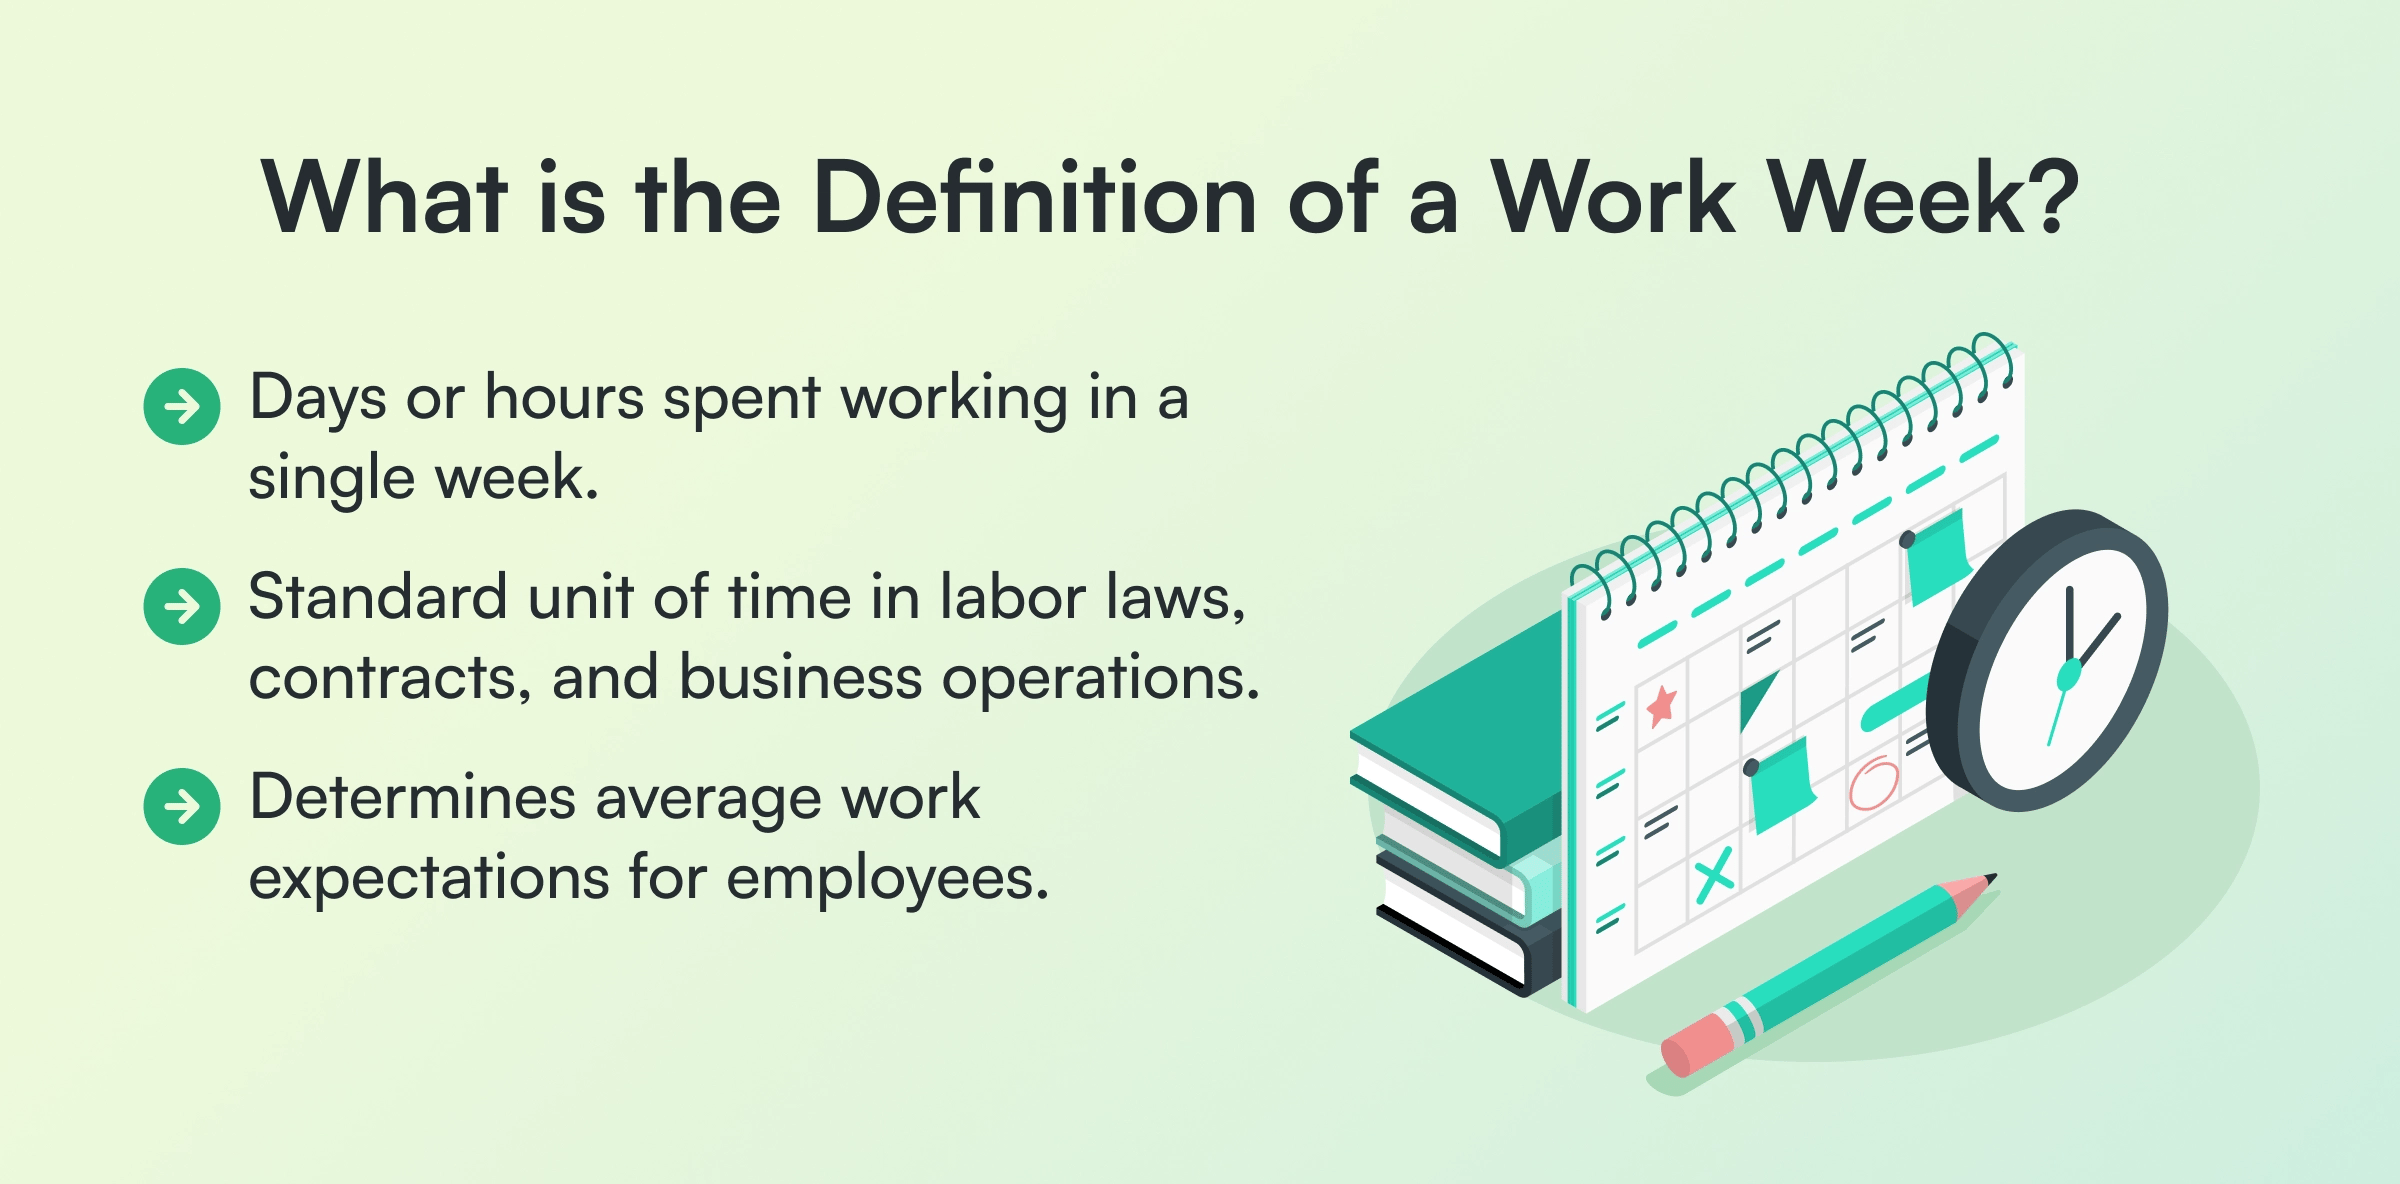 01_What is the Definition of a Work Week